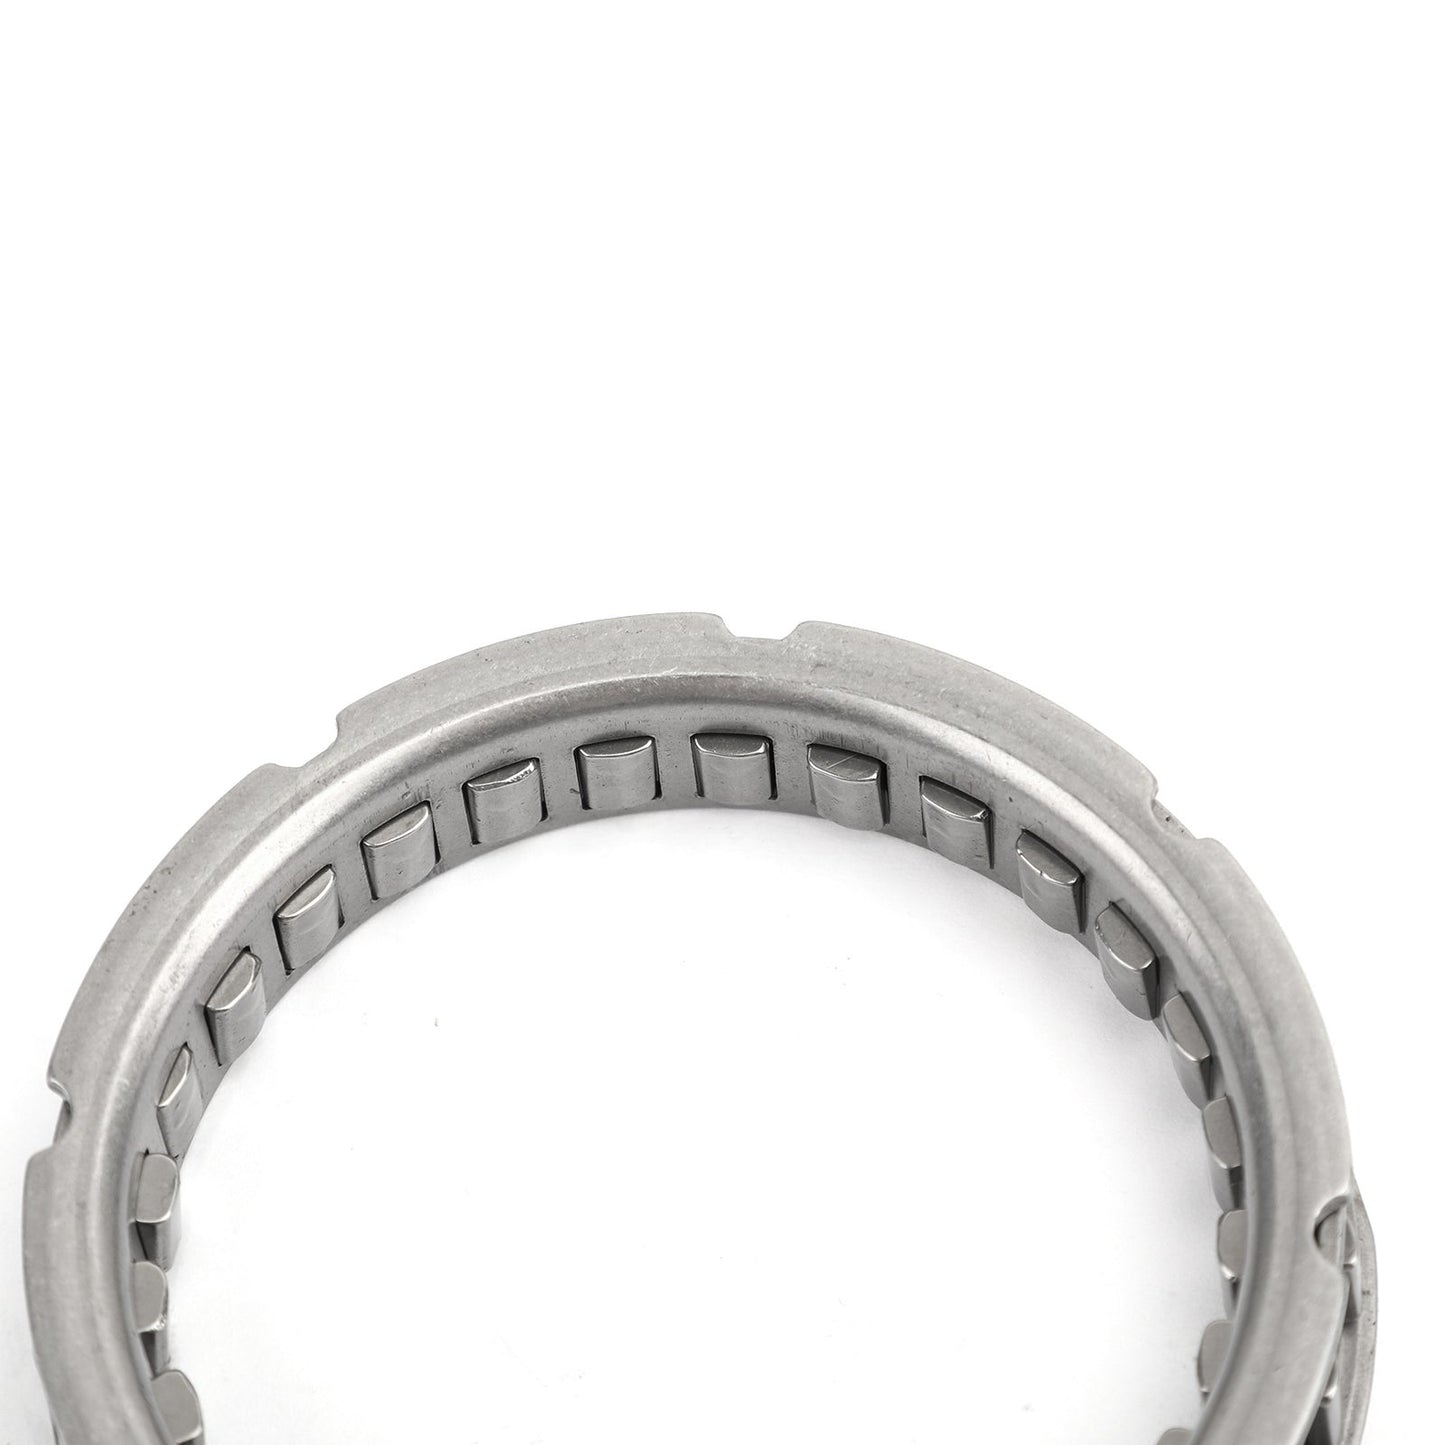 One Way Starter Clutch Bearing for Arctic Cat TRV 550 VLX Prowler ATV 0802-035